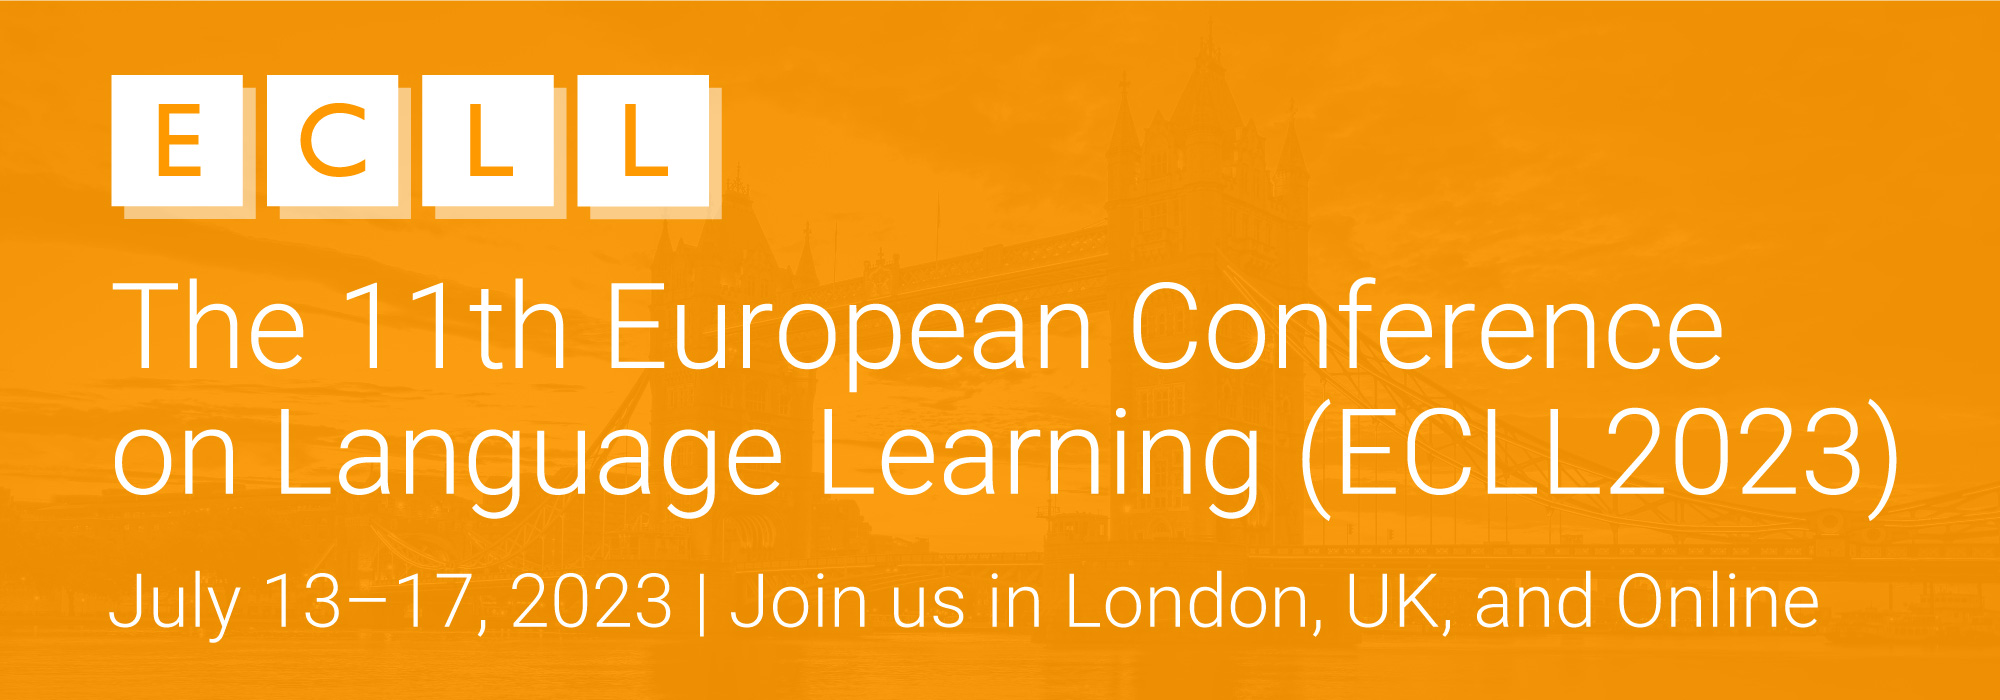 The 11th European Conference on Language Learning ECLL2023 London